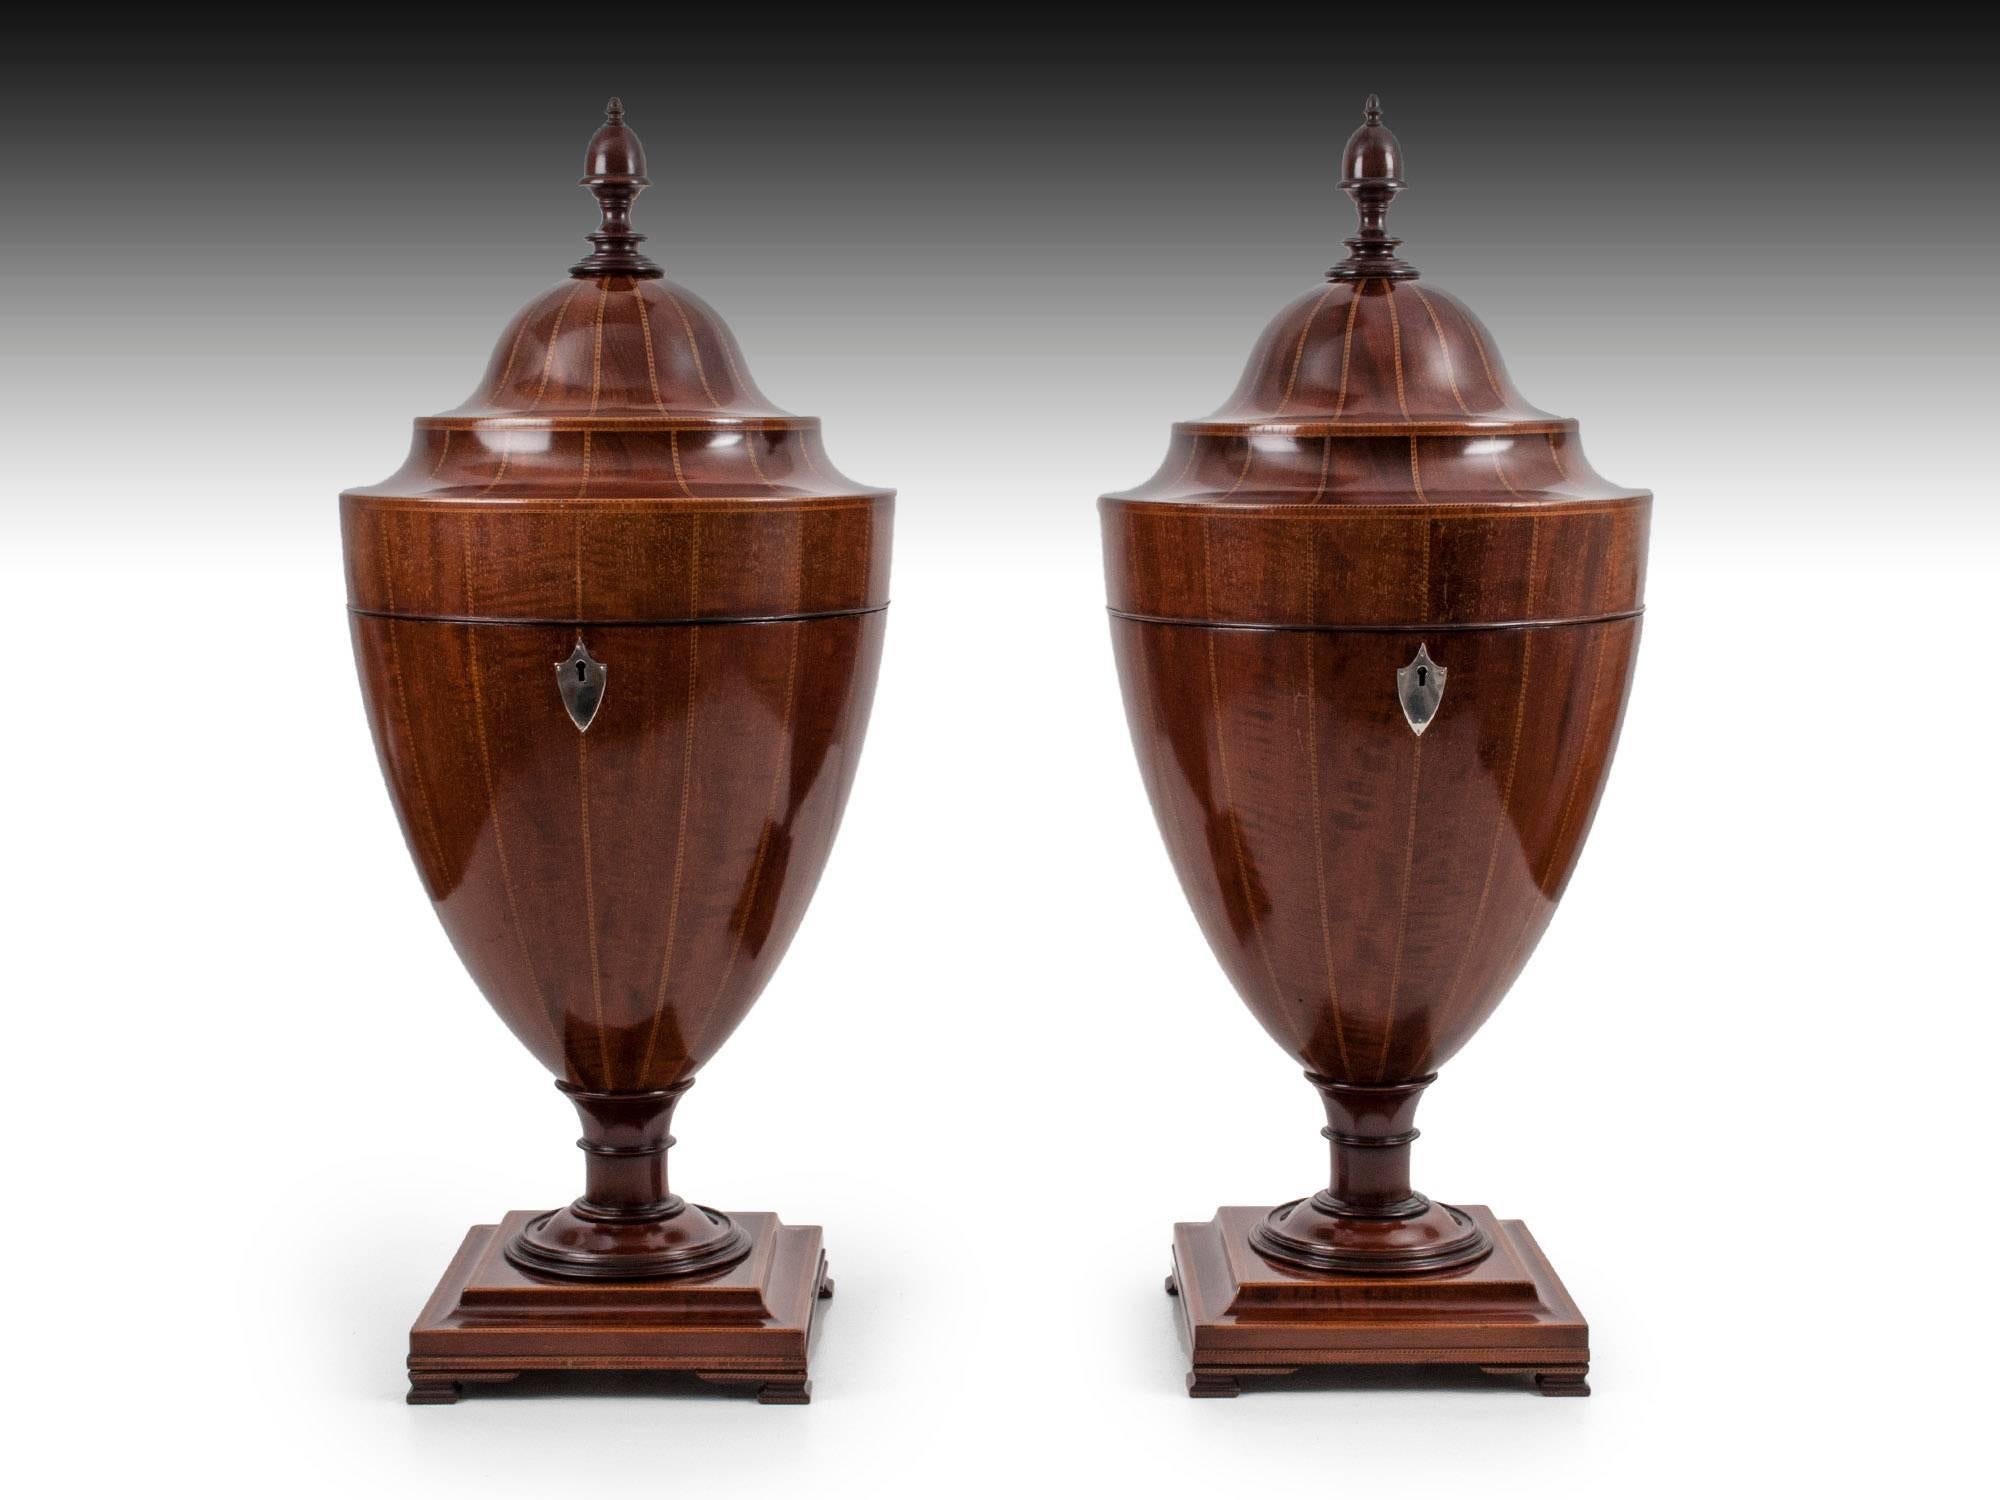 Pair of mahogany cutlery urns inlaid with boxwood herringbone inlay and edged with a boxwood and tulipwood crossbanding. Their fronts are decorated with a silver shield-shaped escutcheon. Each stands on a square plinth base on ogee bracket feet.